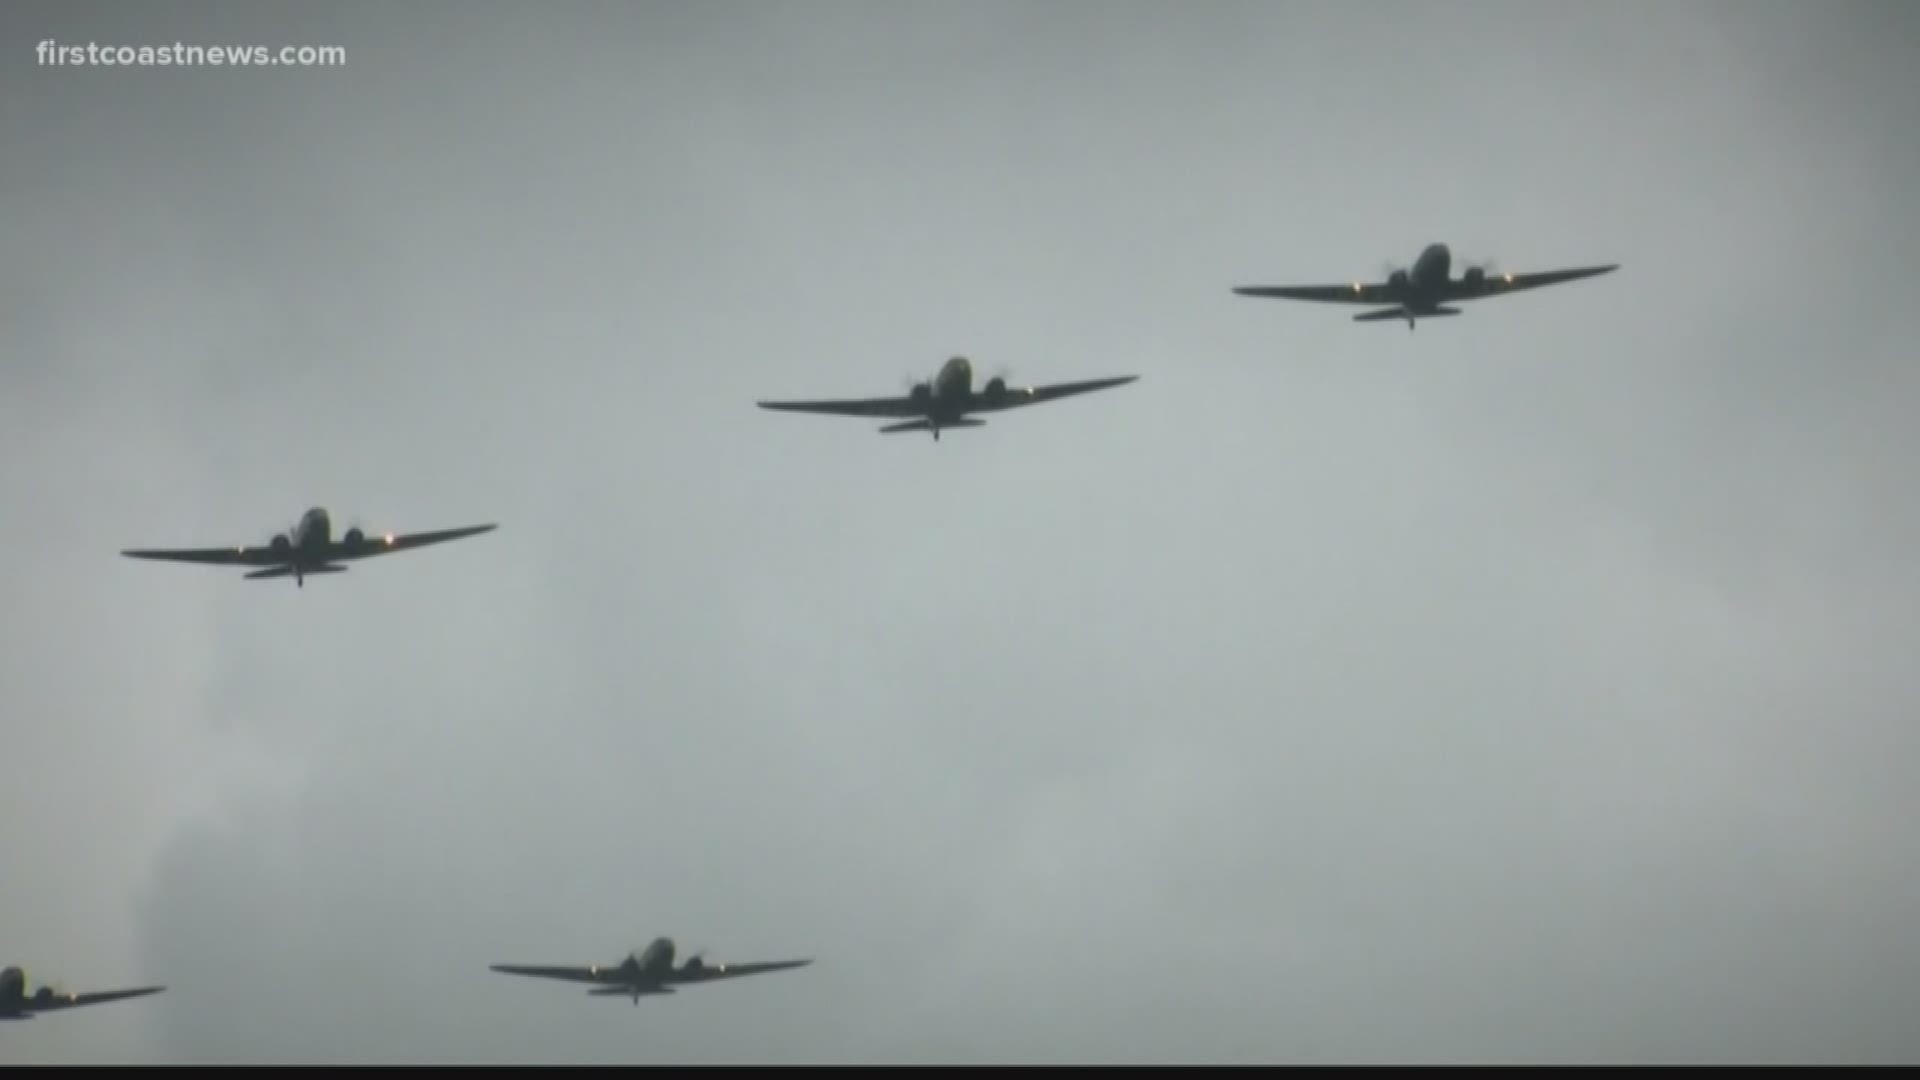 An international ceremony marking the 75th anniversary of D-Day ended with a flyover featuring historic and modern military aircraft.